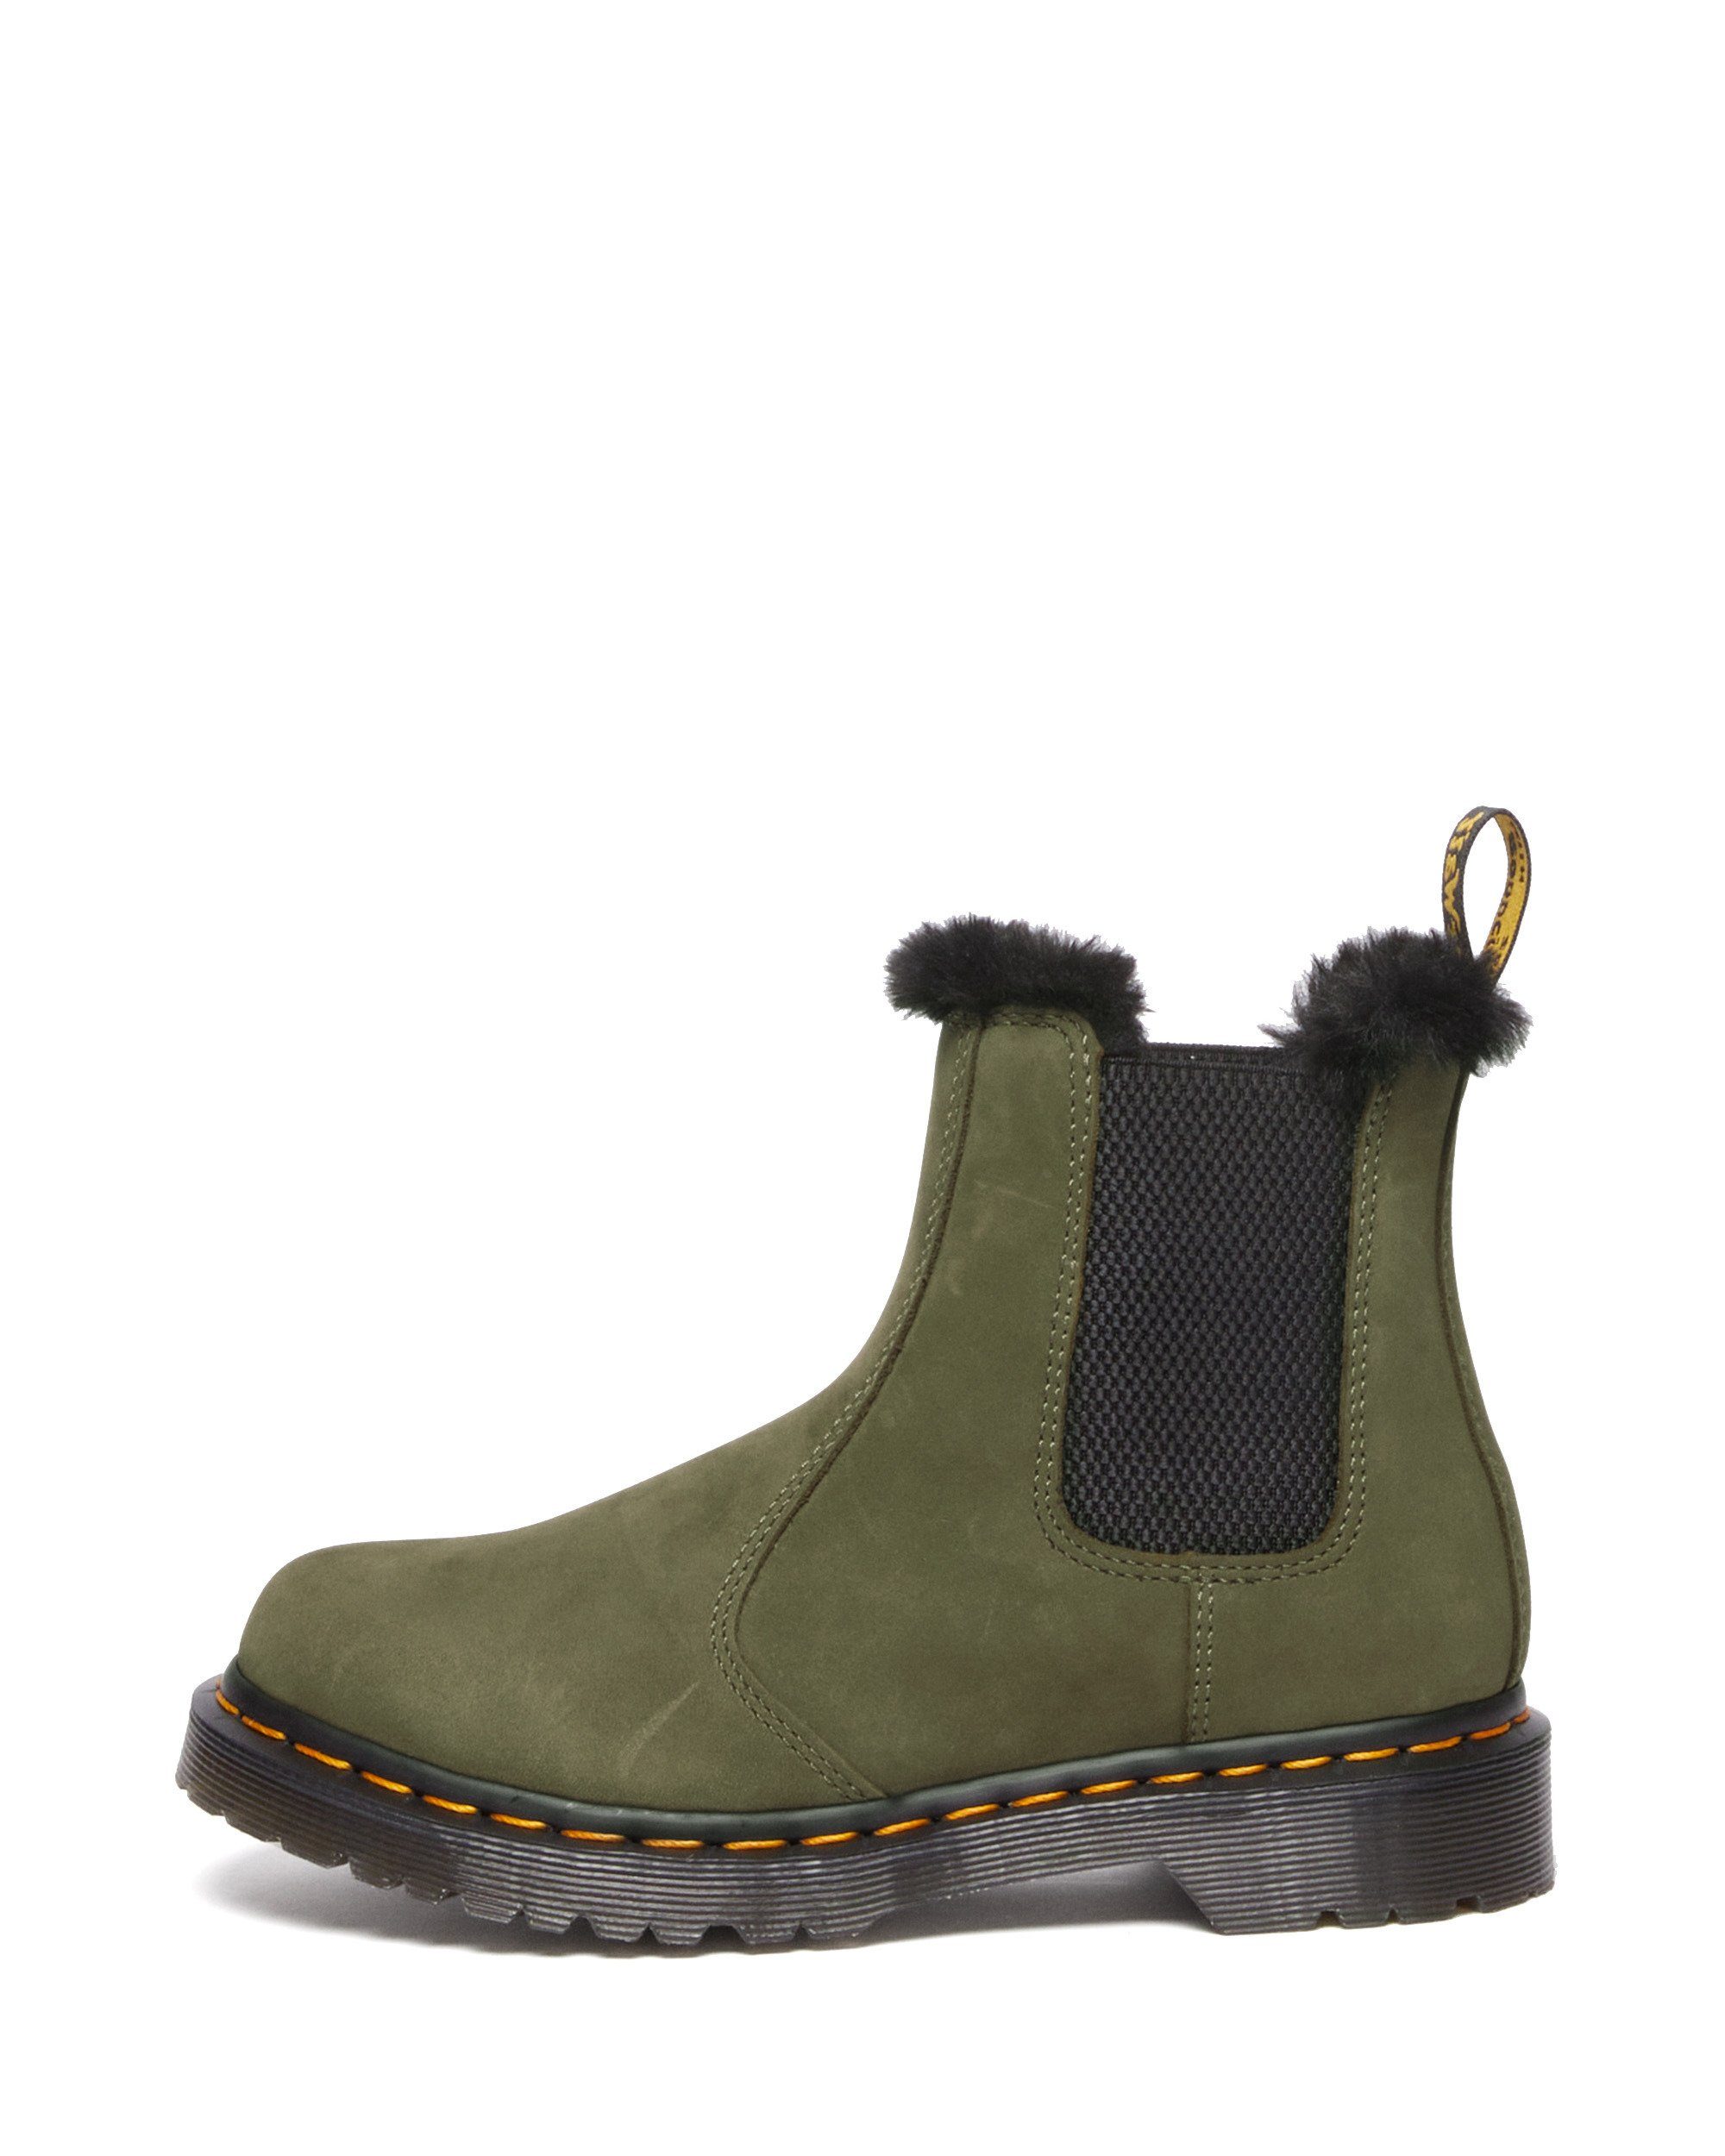 DR. MARTENS 2976 LEONORE Ankleboots (2-tlg) | Chelsea-Boots